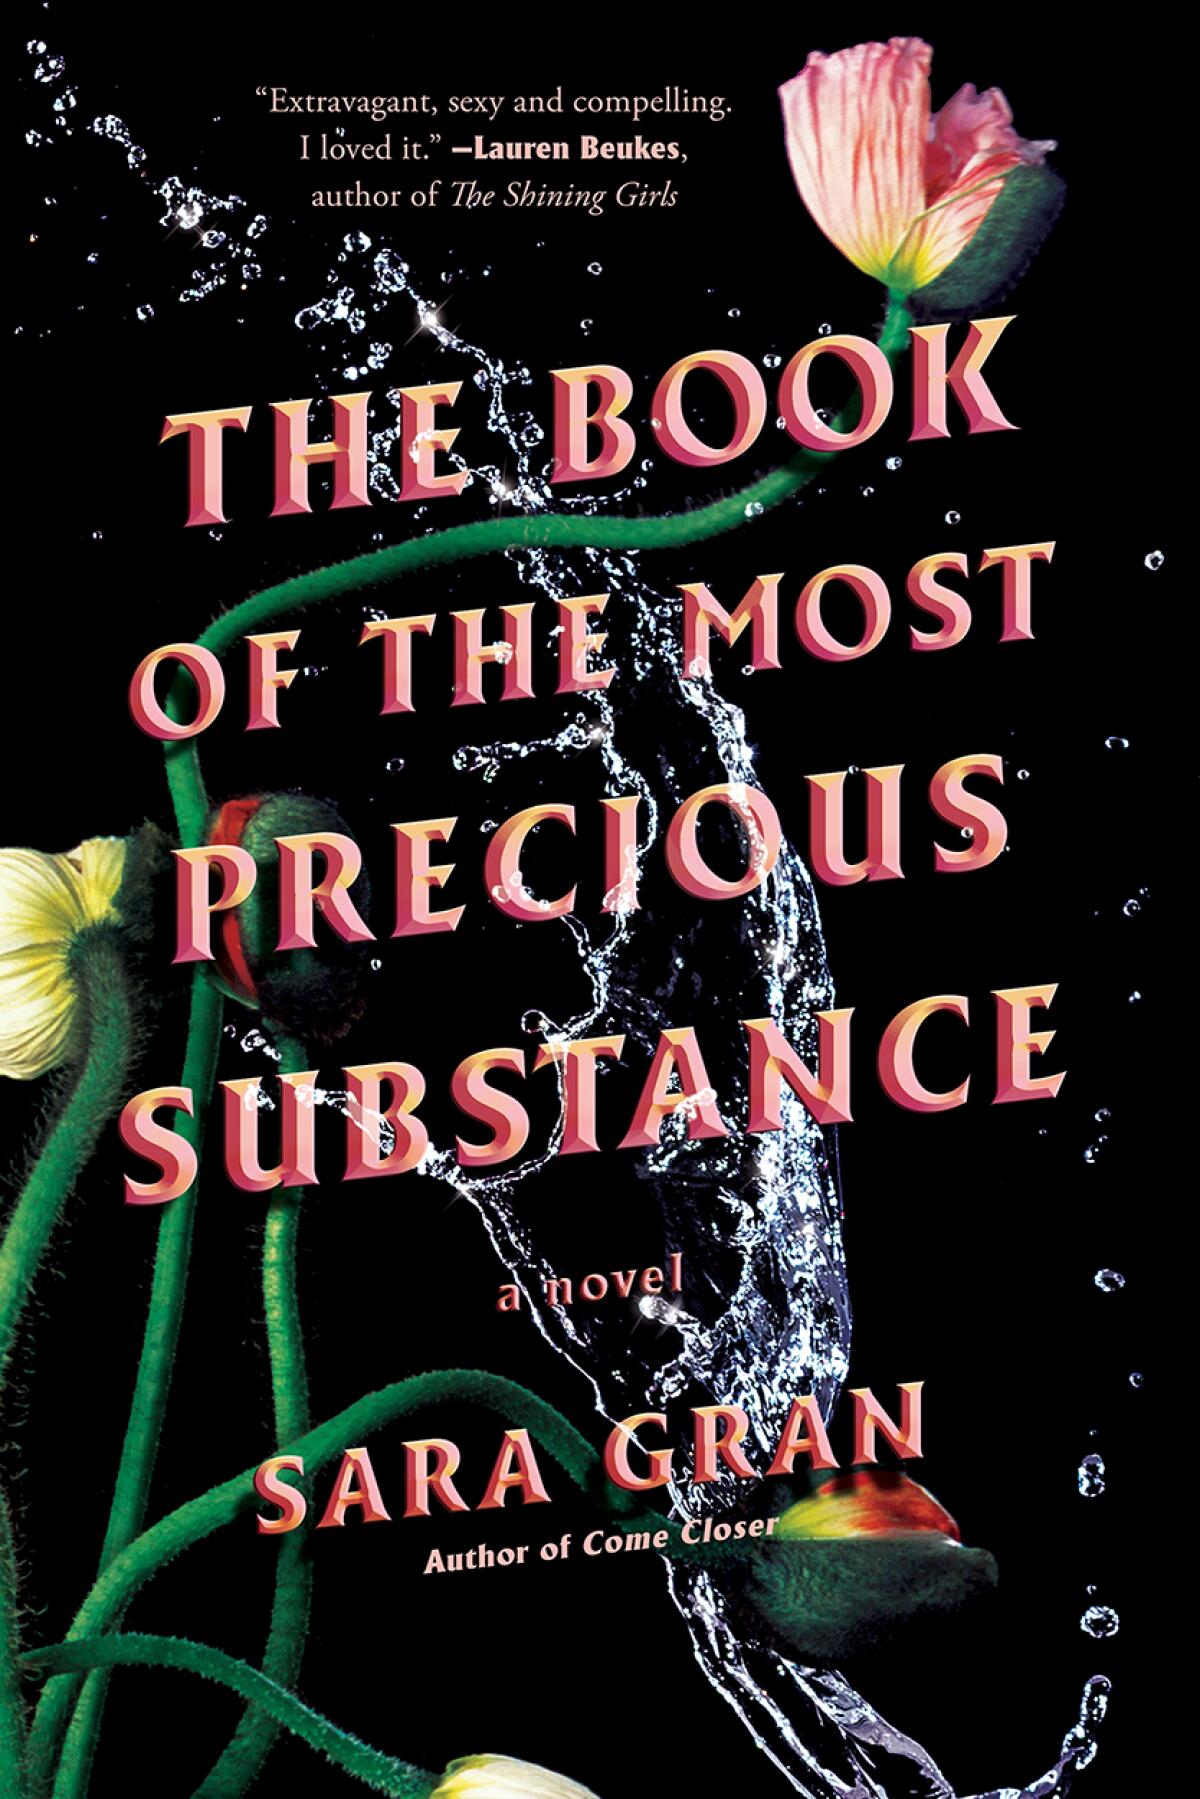 "The Book of the Most Precious Substance," by Sara Gran.